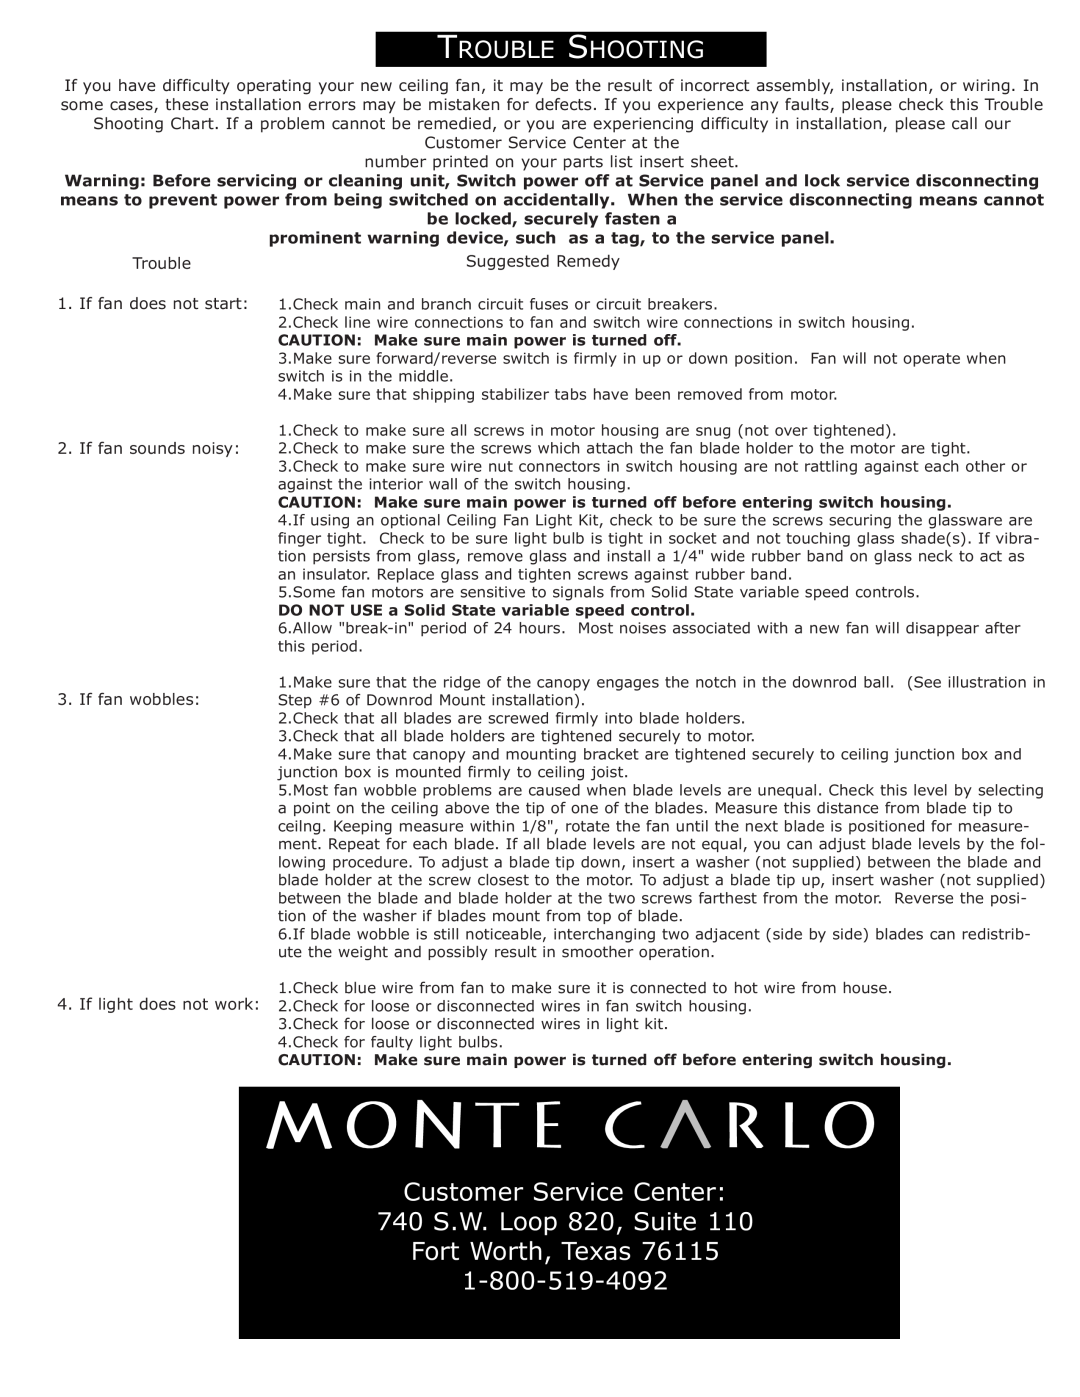 Monte Carlo Fan Company 4CO28 installation instructions Customer Service Center 740 S.W. Loop 820, Suite, Rouble Hooting 